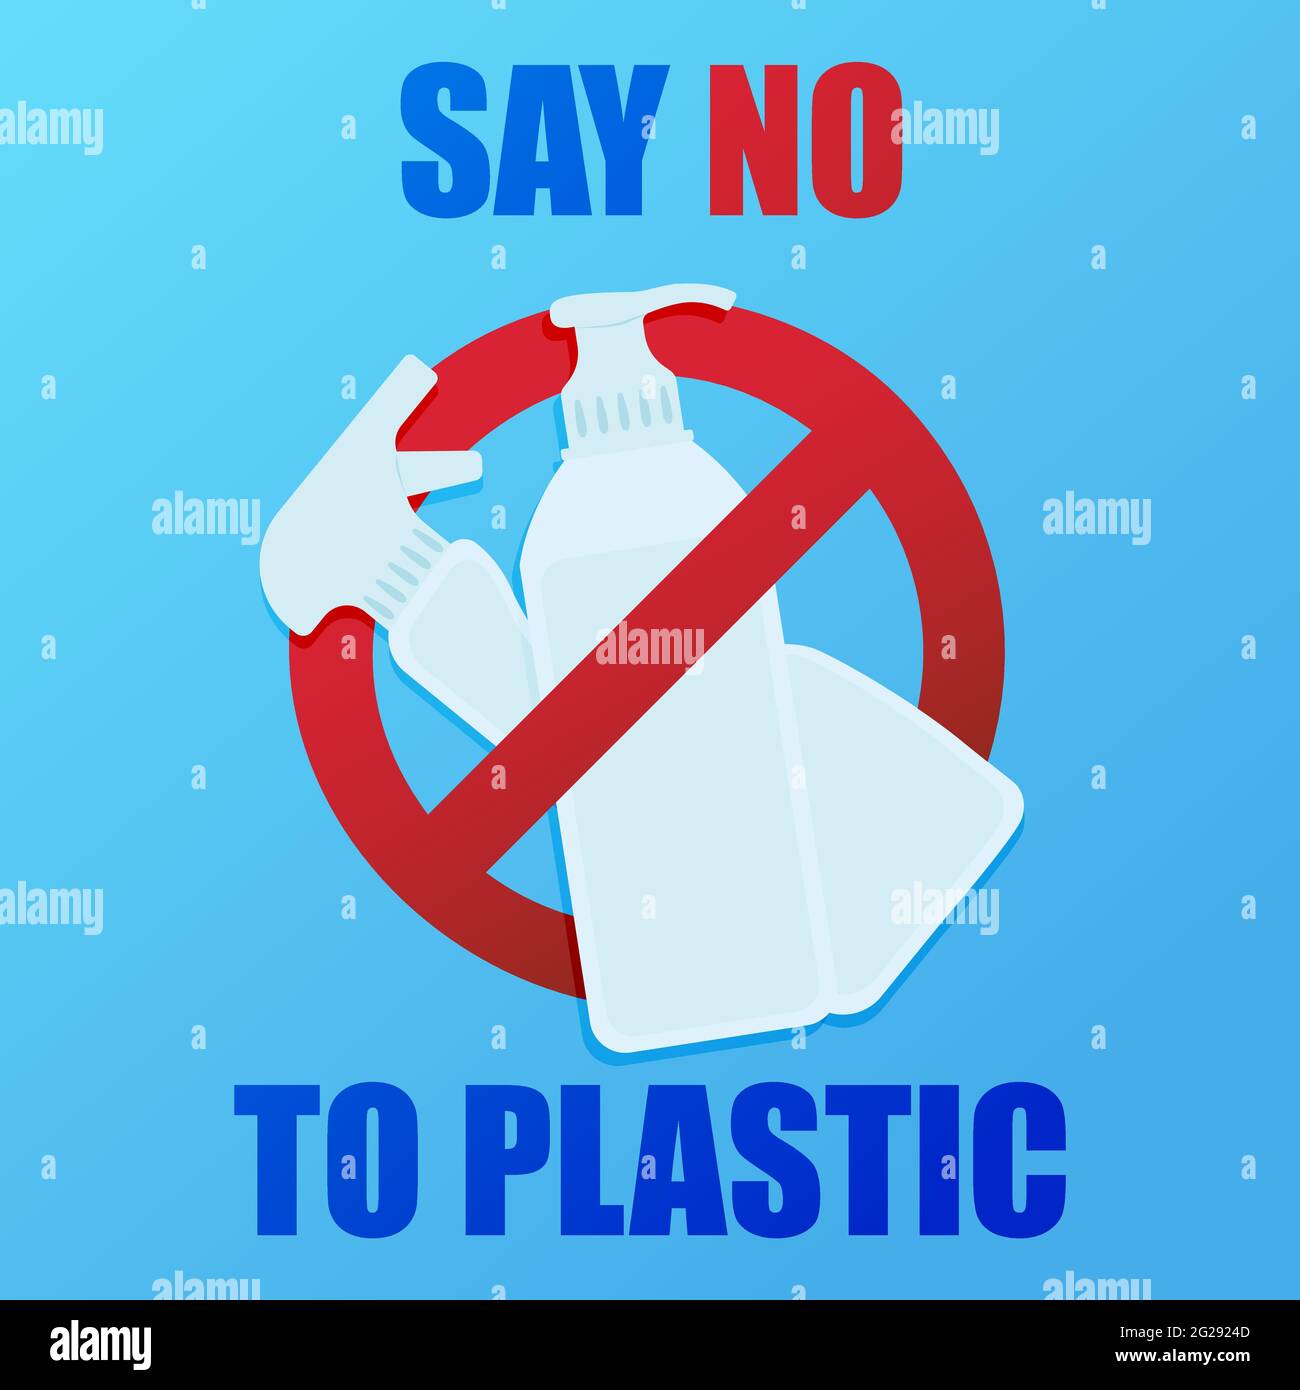 Stop plastic pollution. Save our Earth. A banner with a red prohibition sign crosses out the plastic bottle of detergent. Environmental poster. Stock Vector